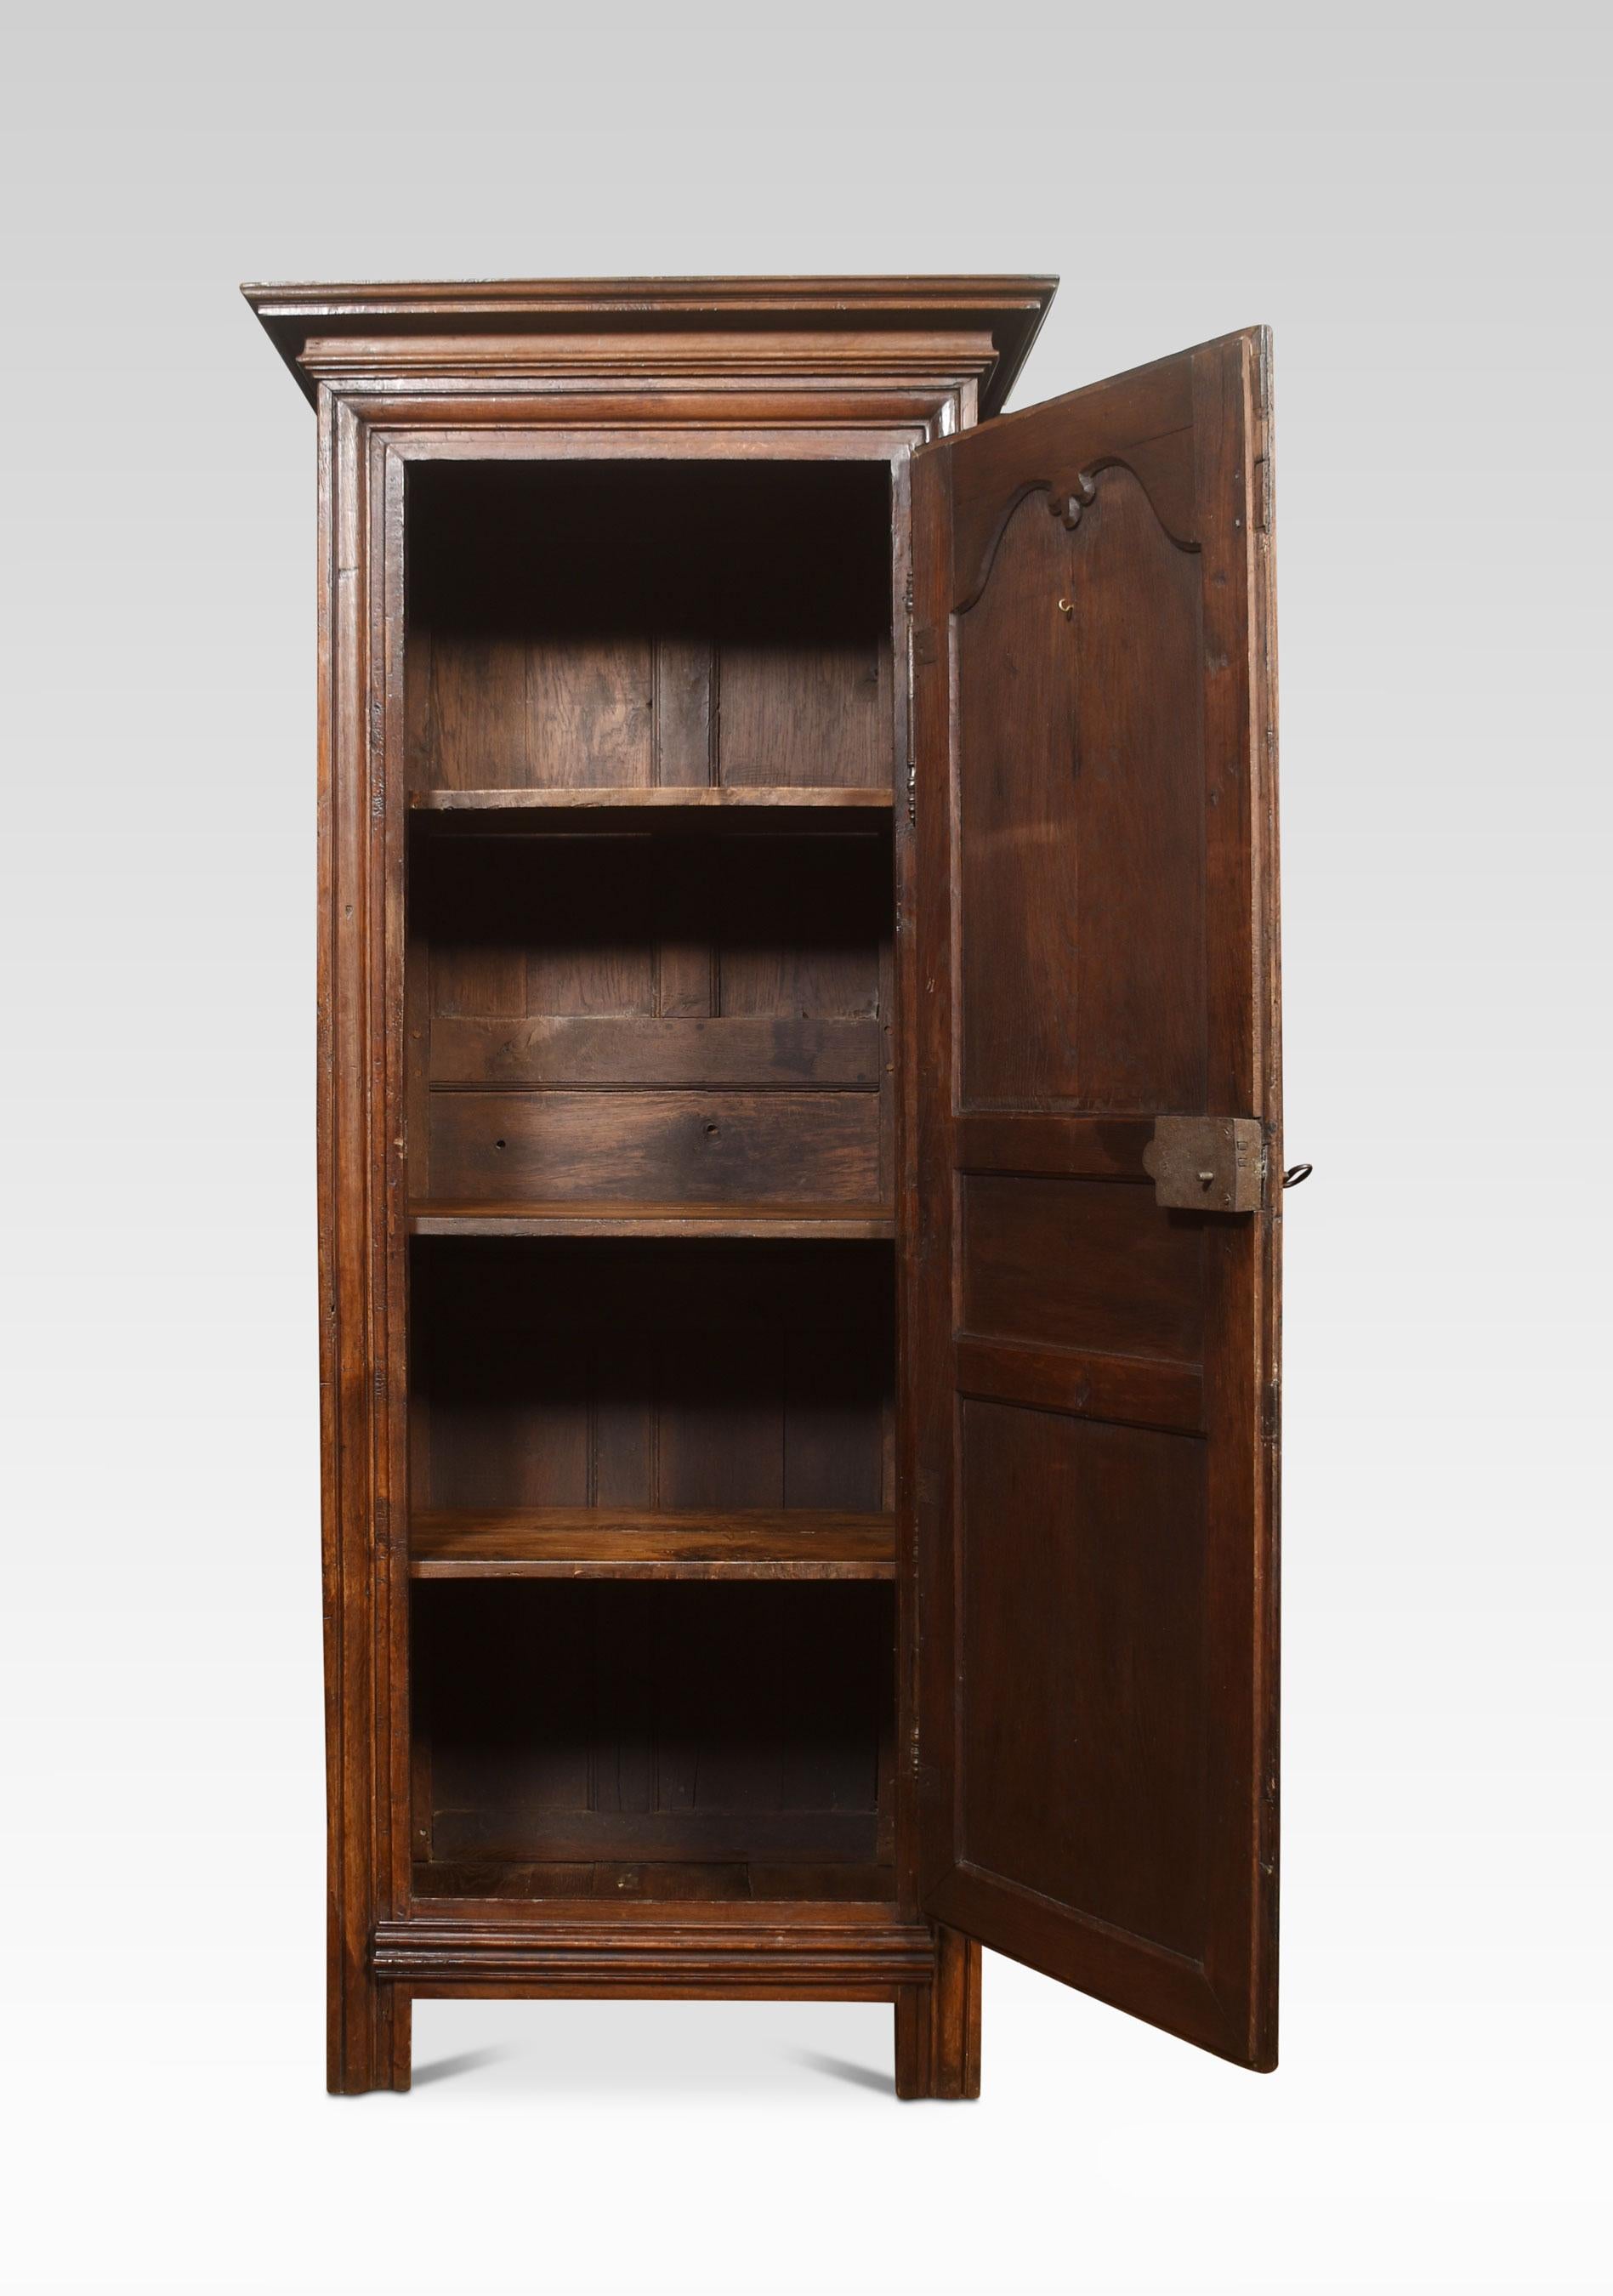 19th century Country French bonnetiere petite armoire with stepped pediment above large carved scrolling panel door enclosing shelved interior All raised up on block supports.
Dimensions
Height 88.5 Inches
Width 38.5 Inches
Depth 22.5 Inches.